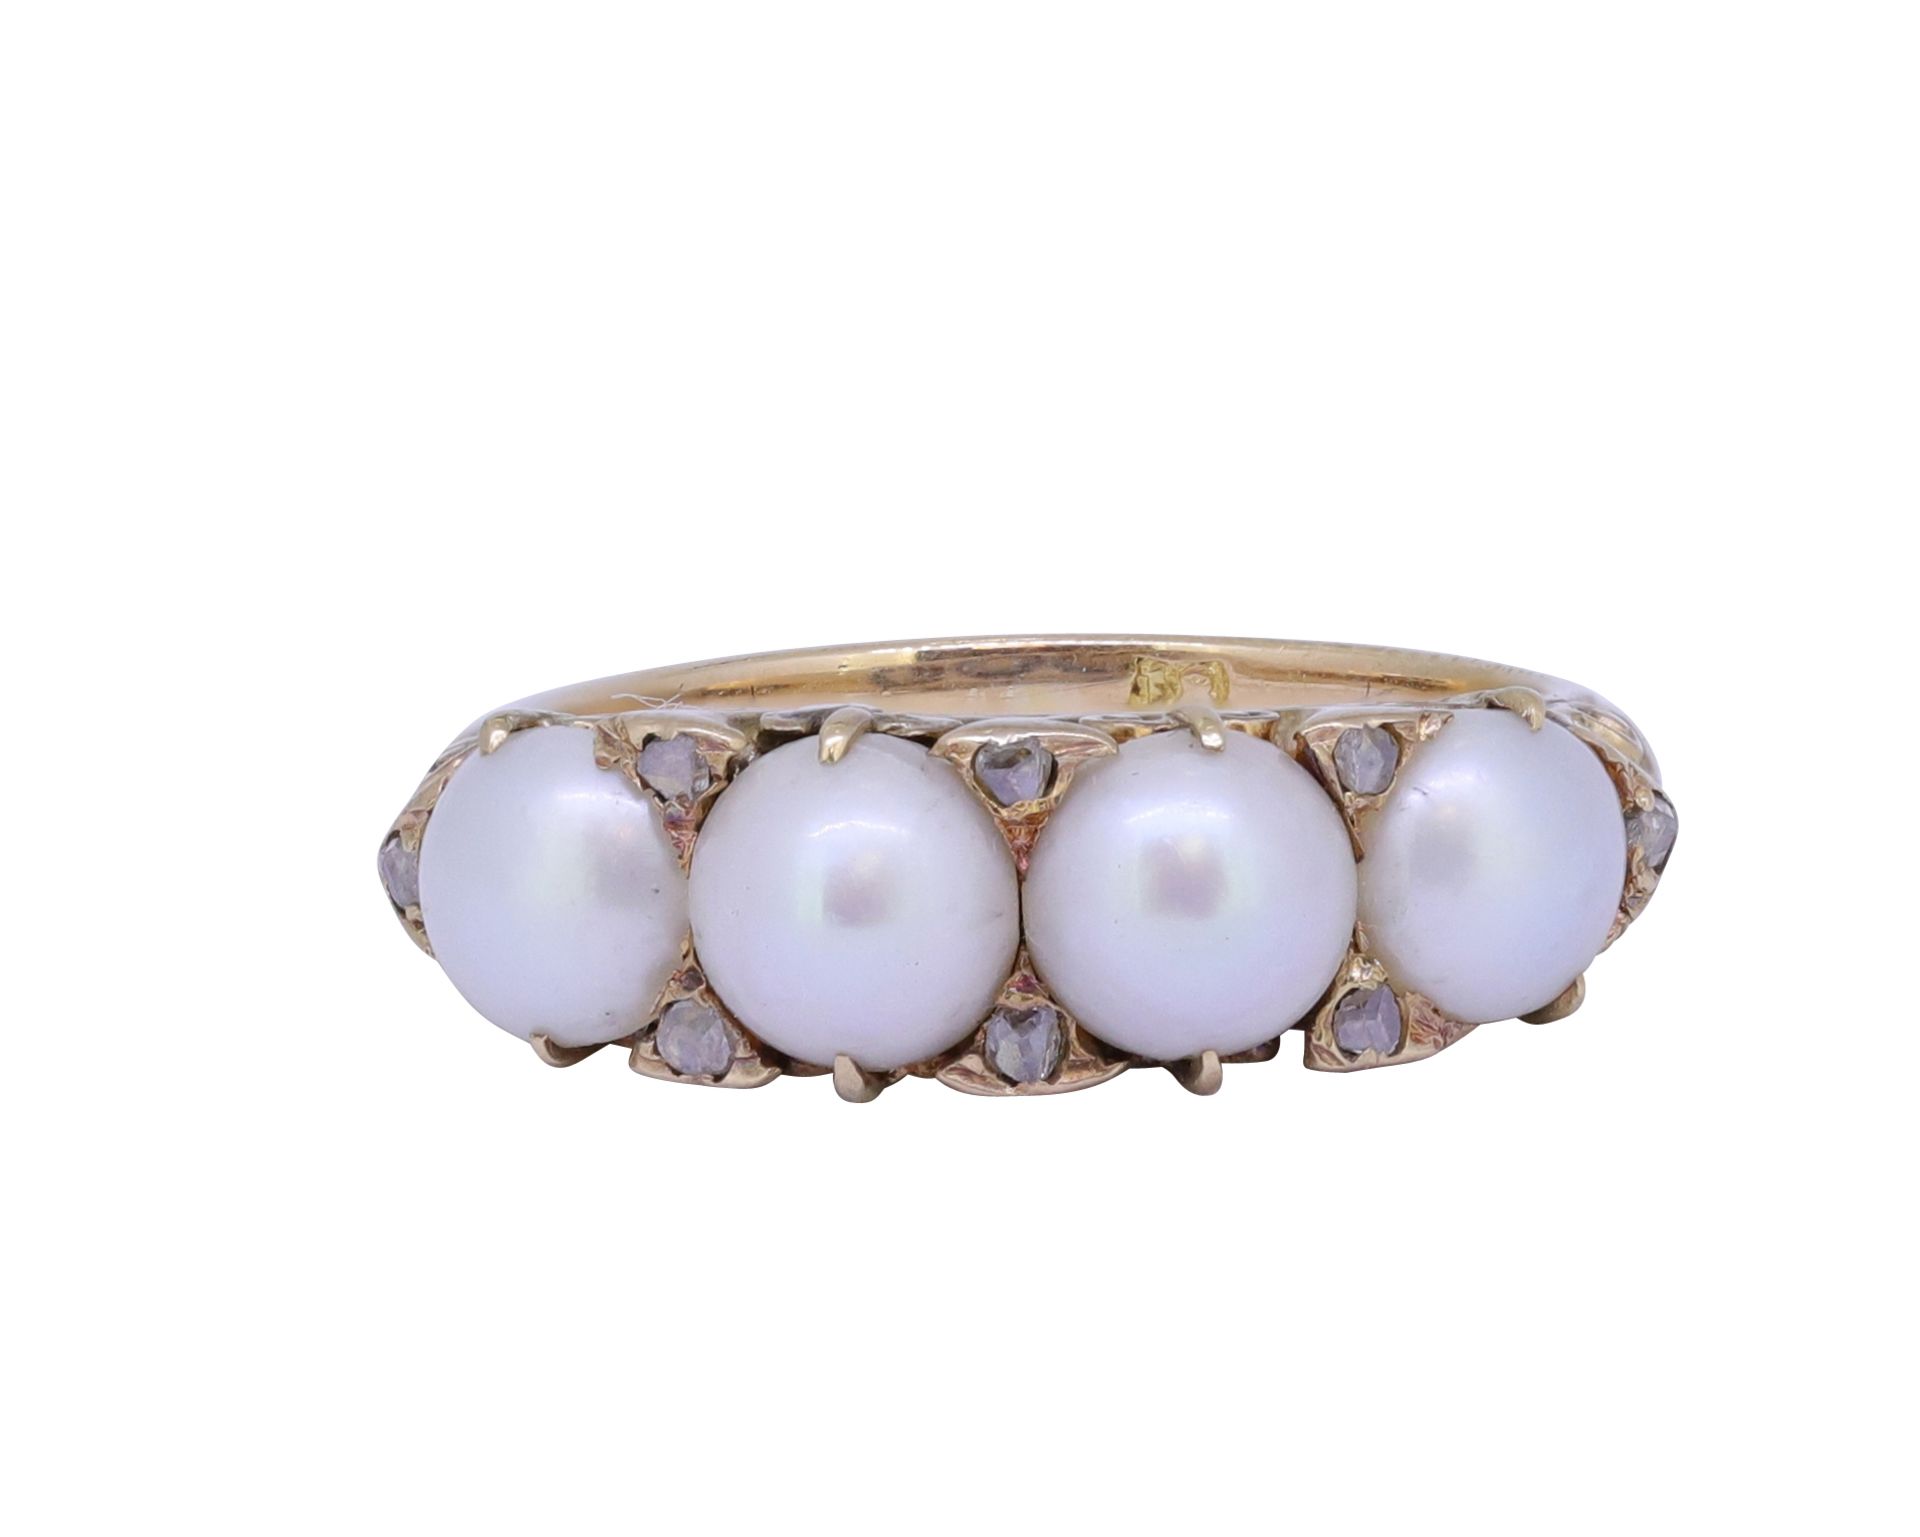 PEARL AND DIAMOND RING